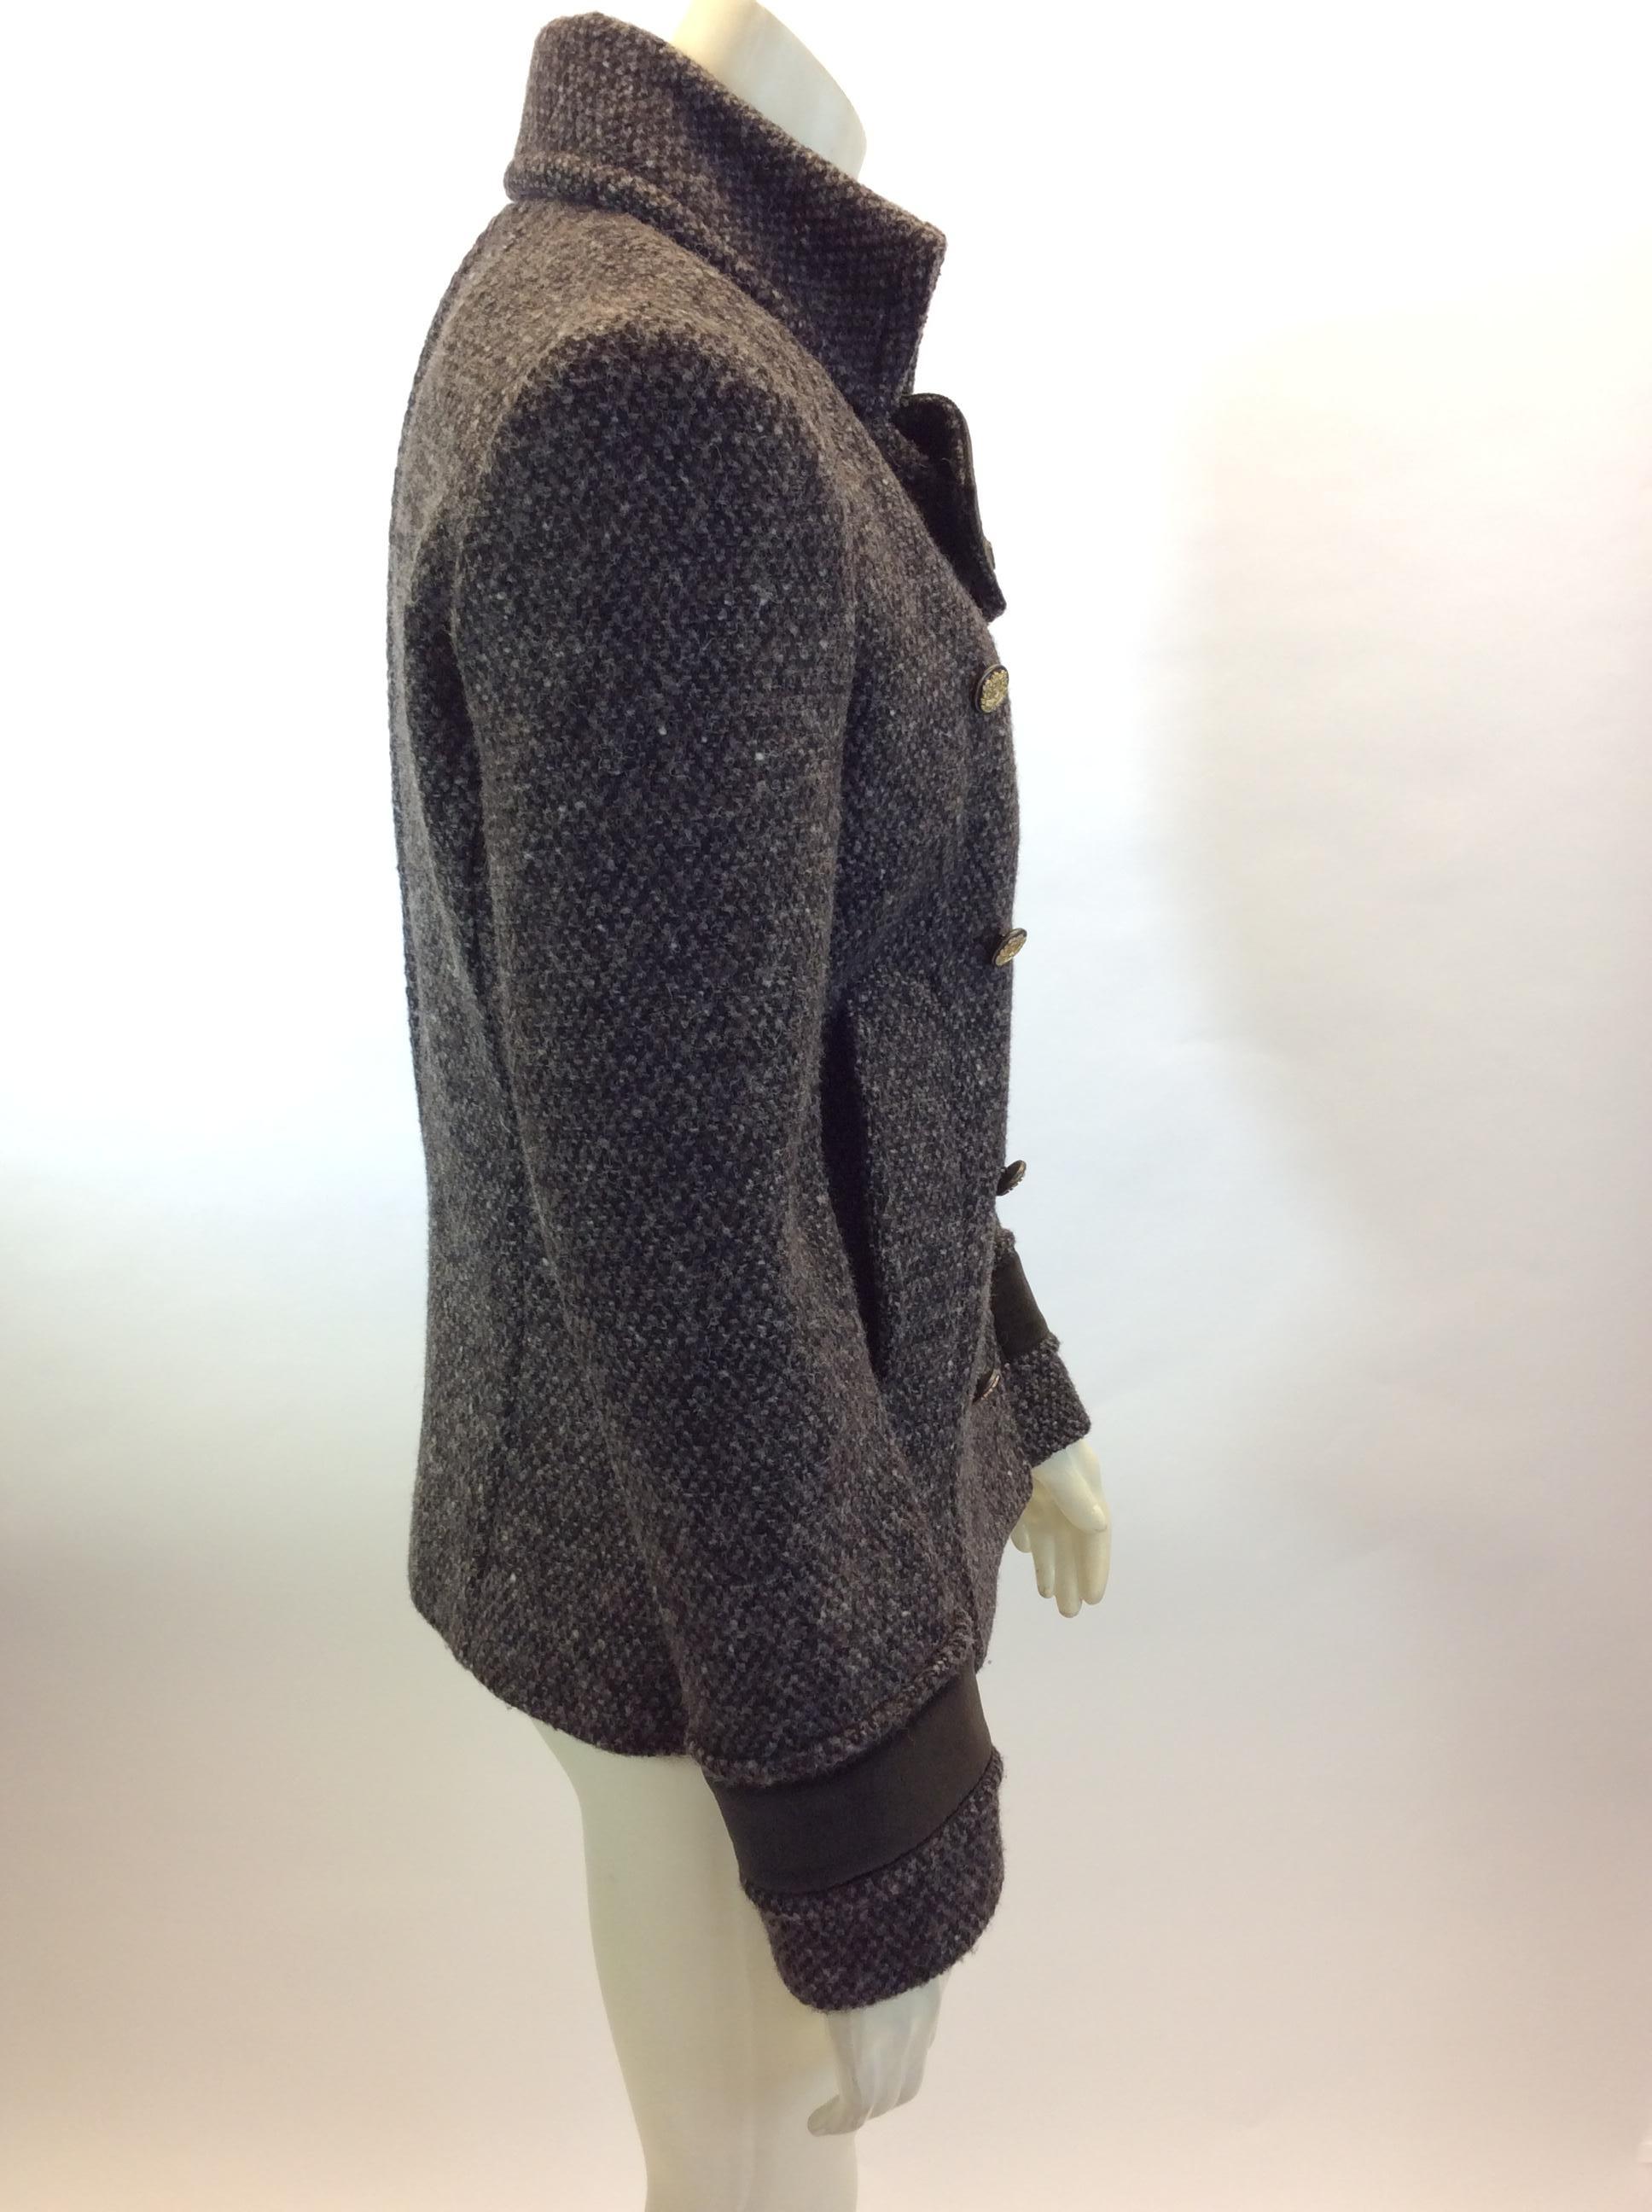 Dolce & Gabbana Grey Tweed Wool Jacket In Good Condition For Sale In Narberth, PA